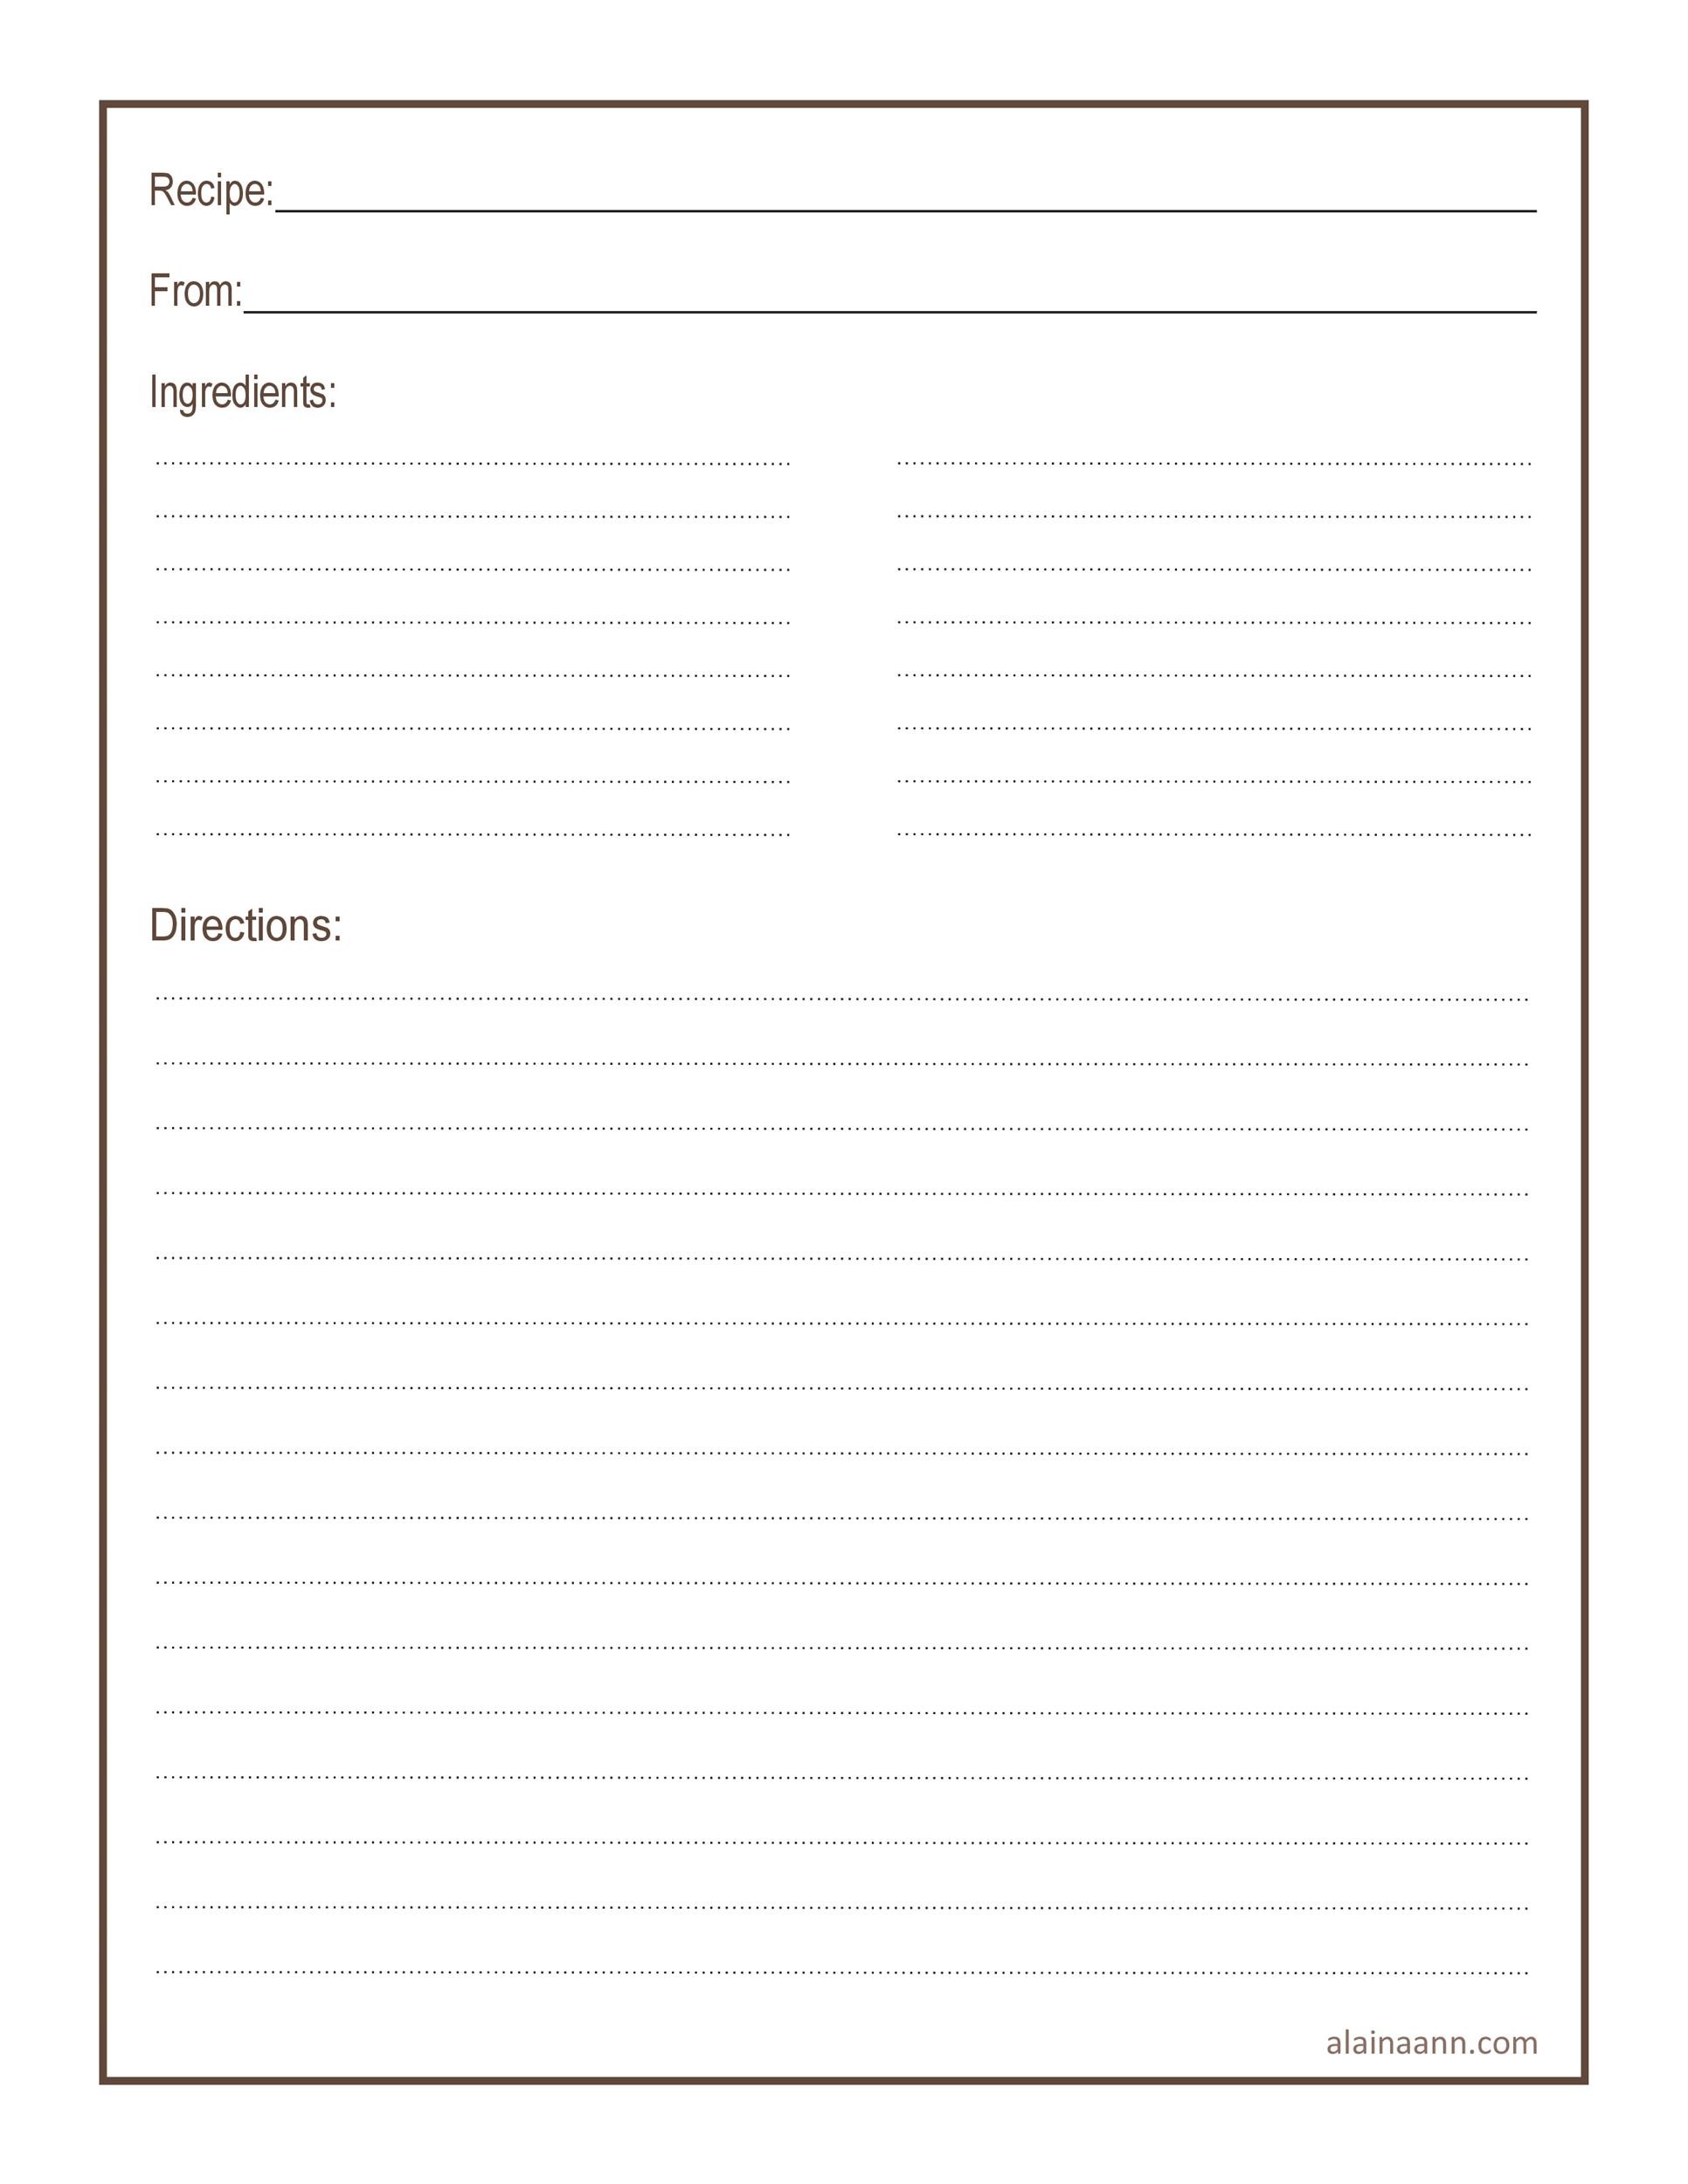 Free Printable Recipe Pages That are Lucrative | Bates's ...